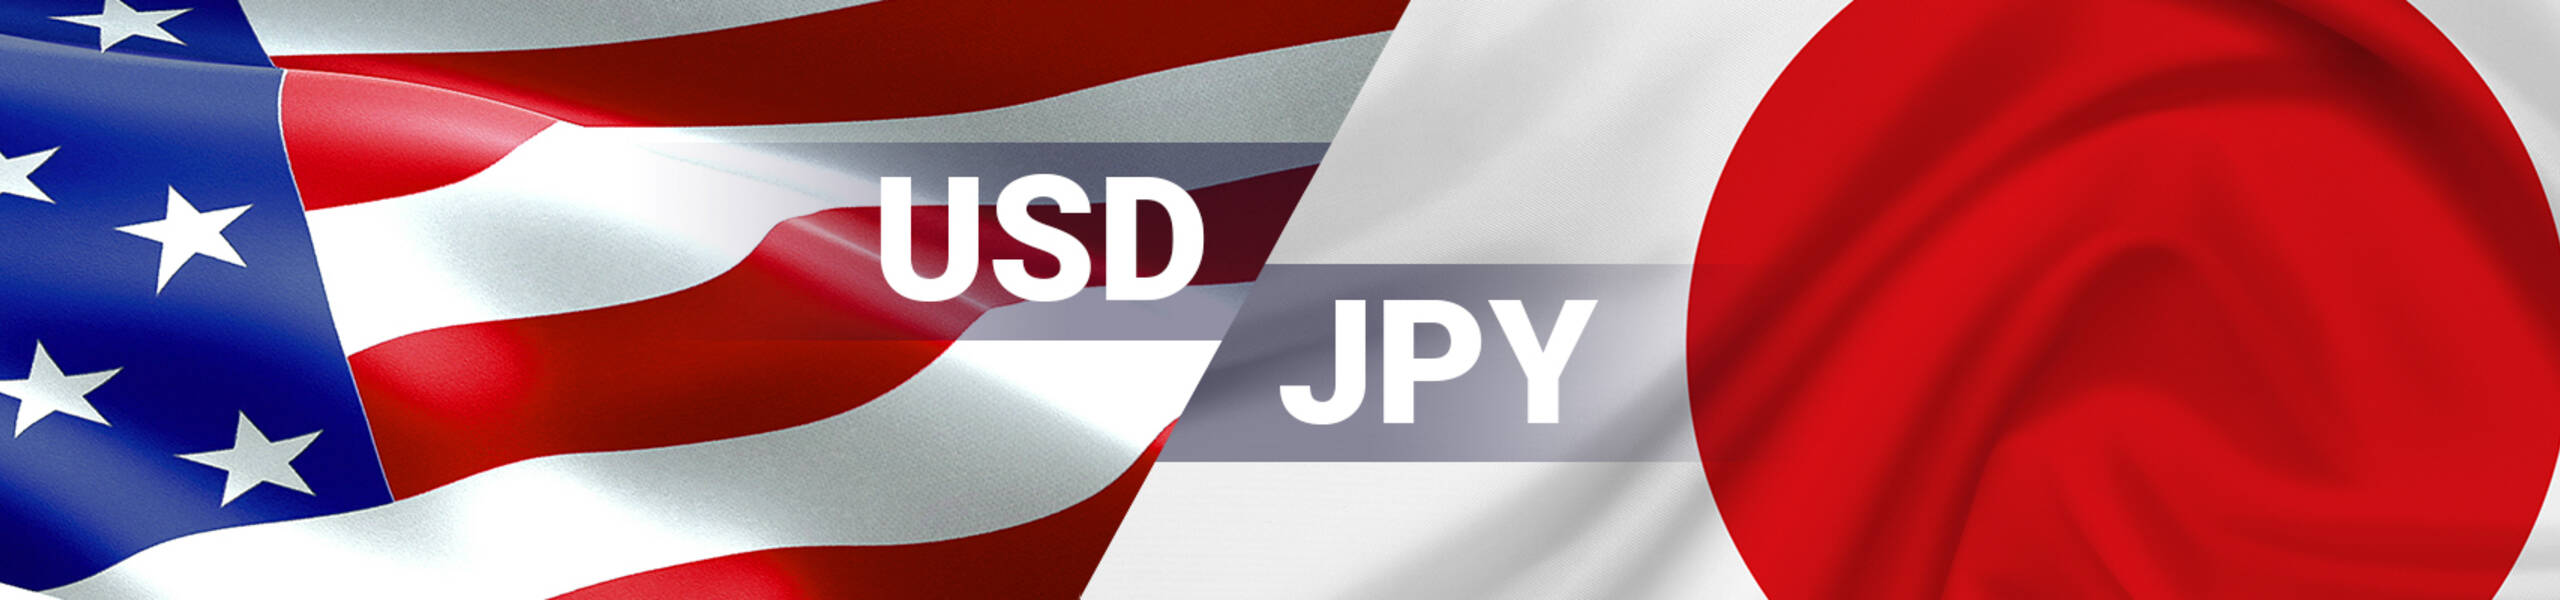 USD/JPY reached sell target 108.80